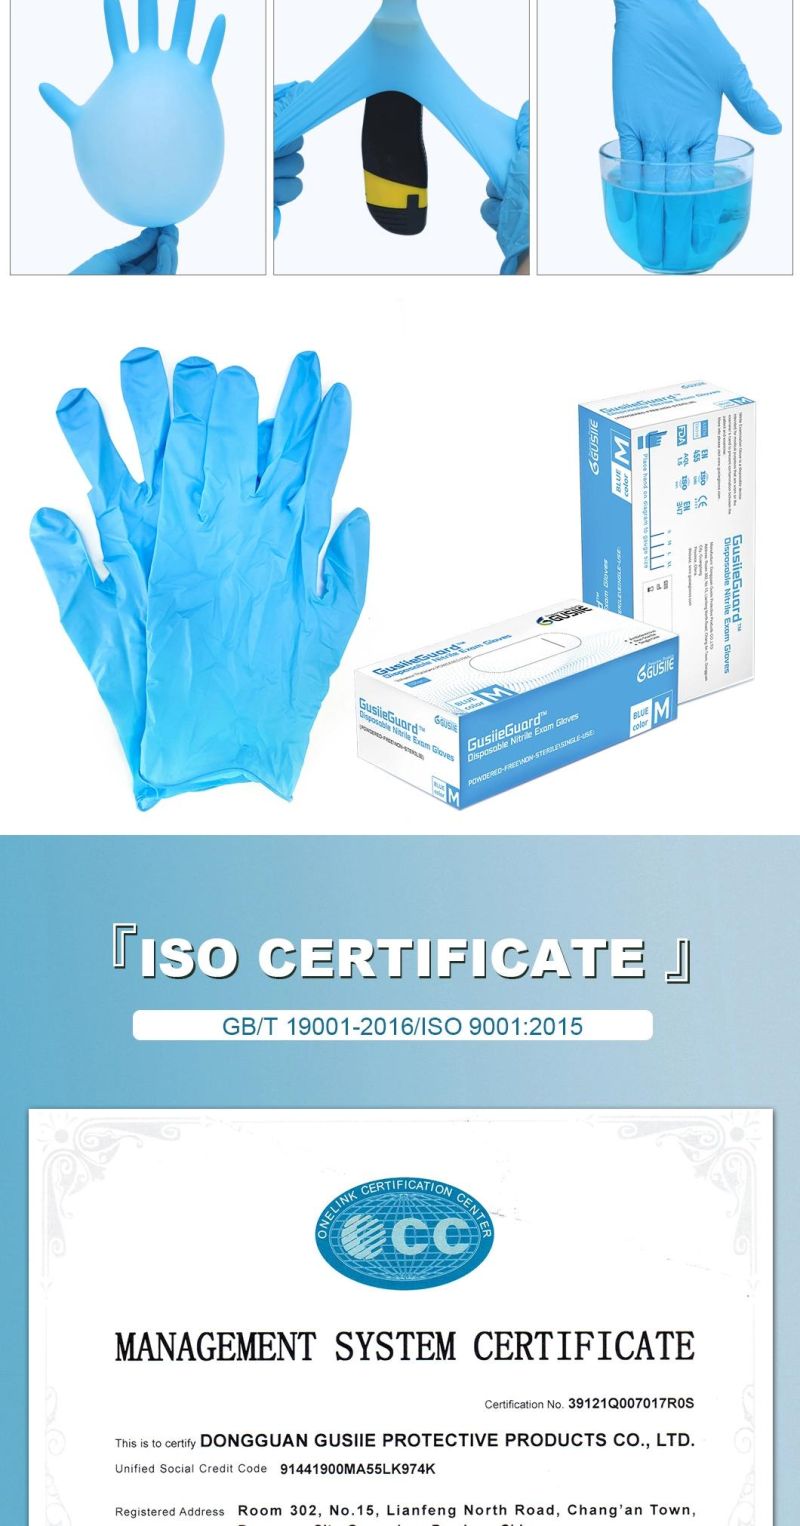 Disposable Blue Nitrile Gloves Powder Free for Factory Direct-Selling High-Quality Medical Examination Large Gloves